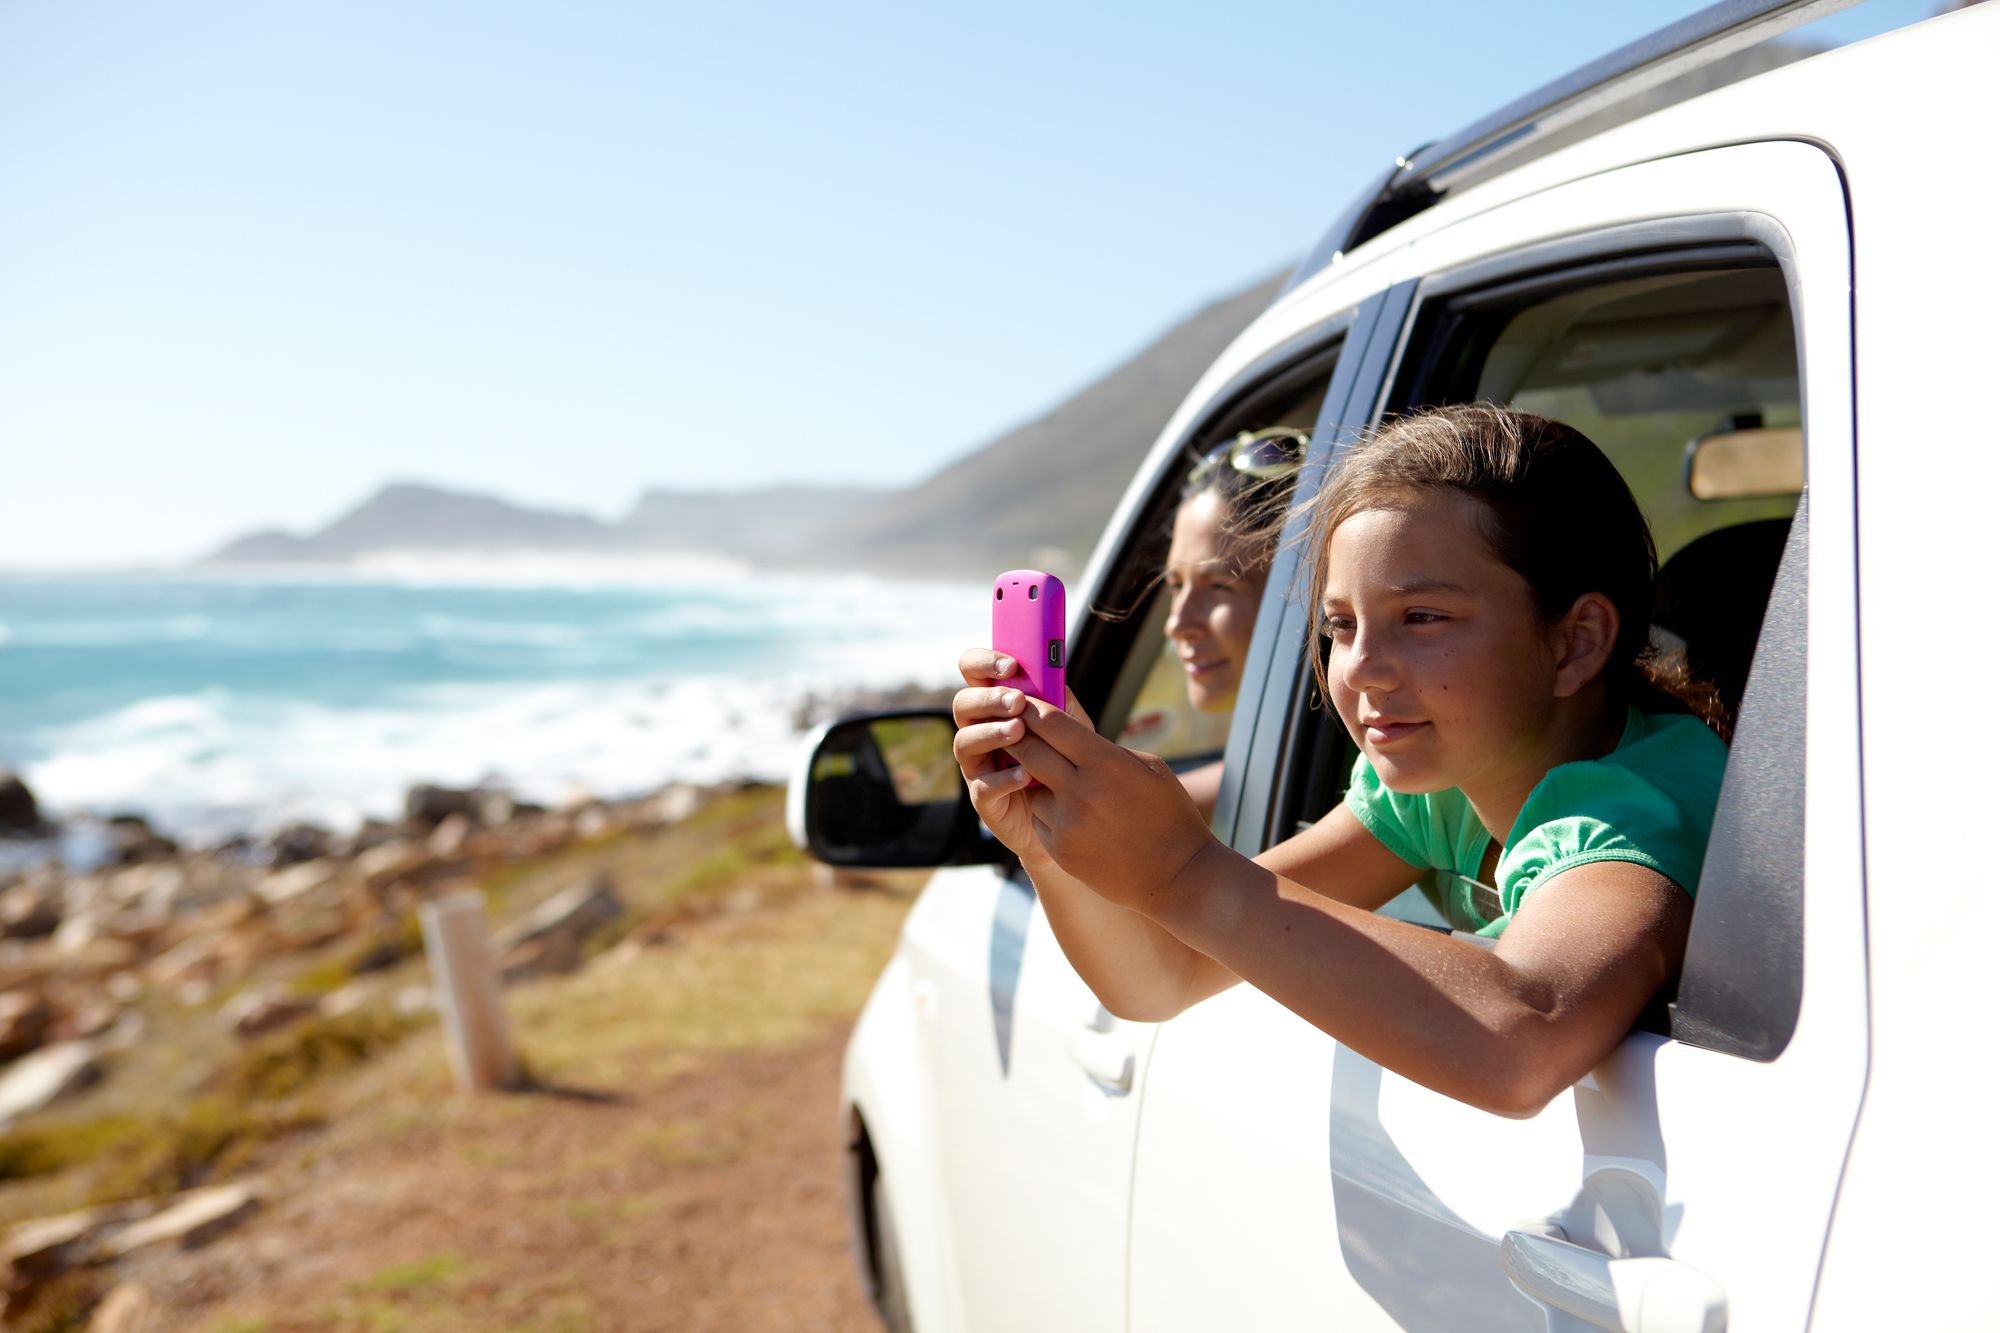 Planning a 2021 spring break road trip: How to make it affordable, safe, and fun